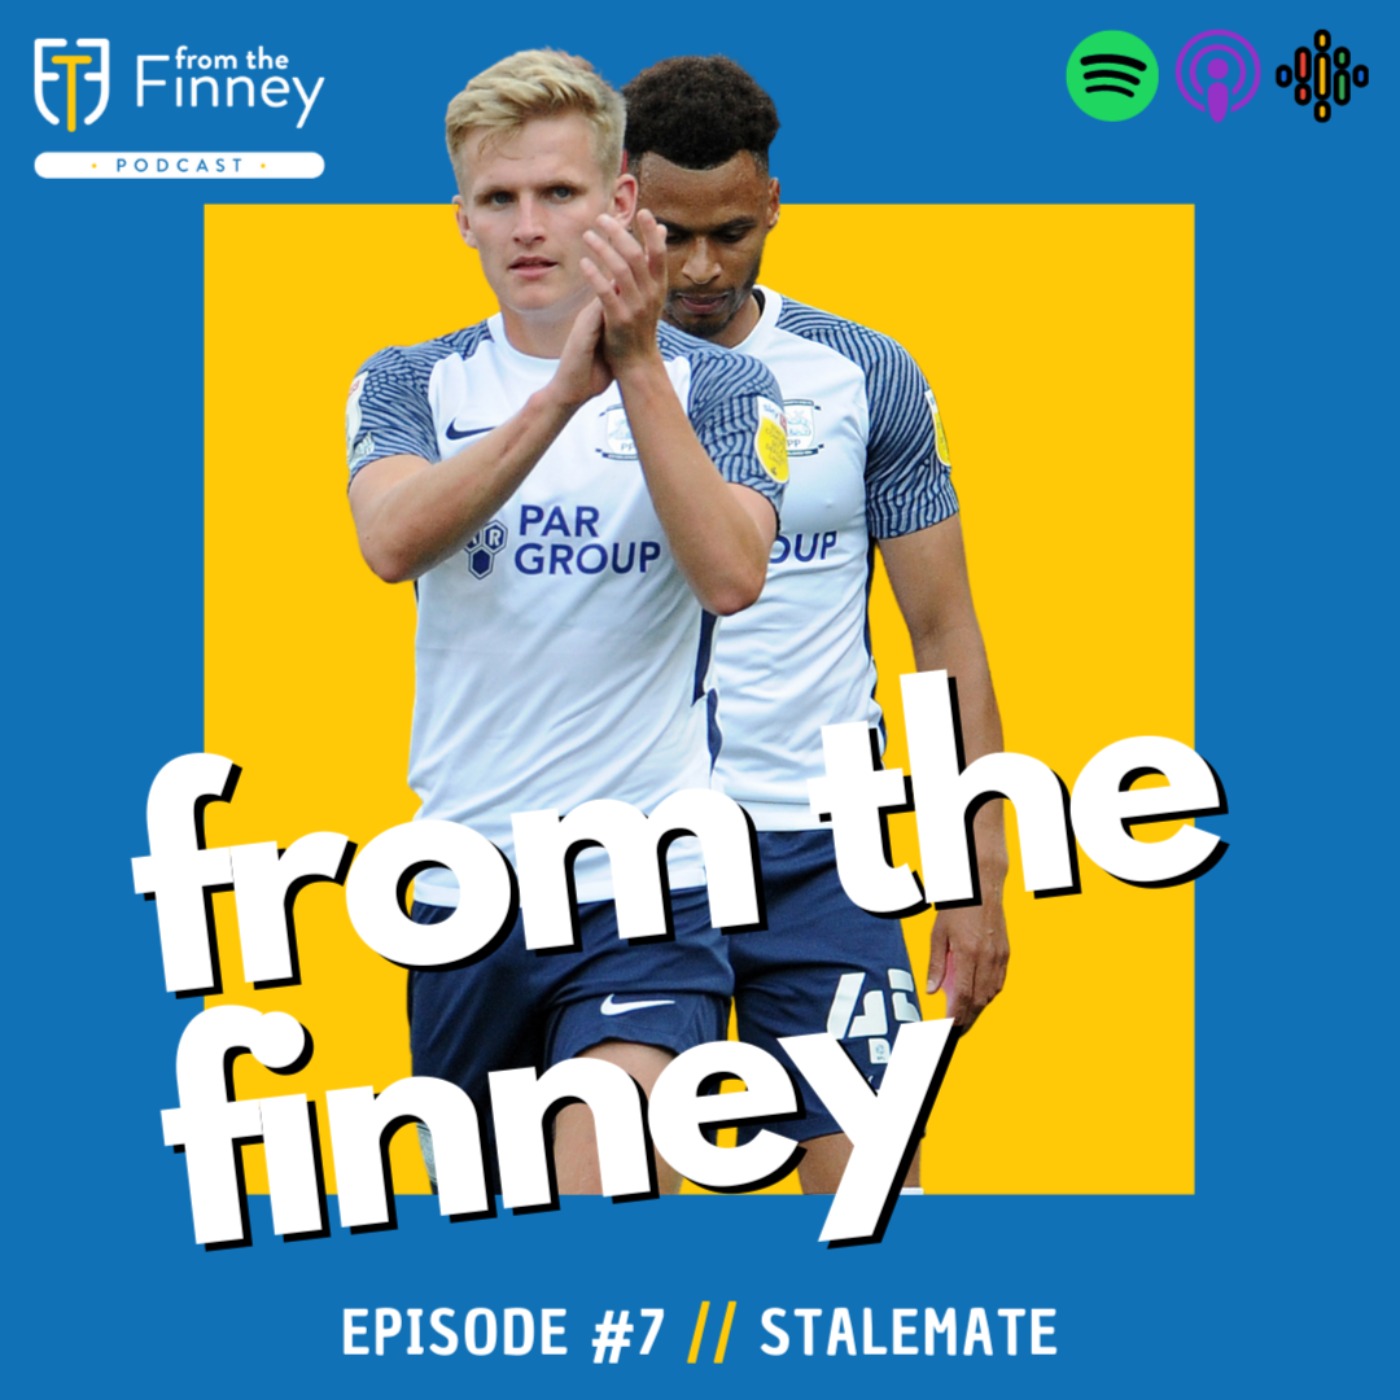 Episode #7 // Stalemate // From the Finney Podcast